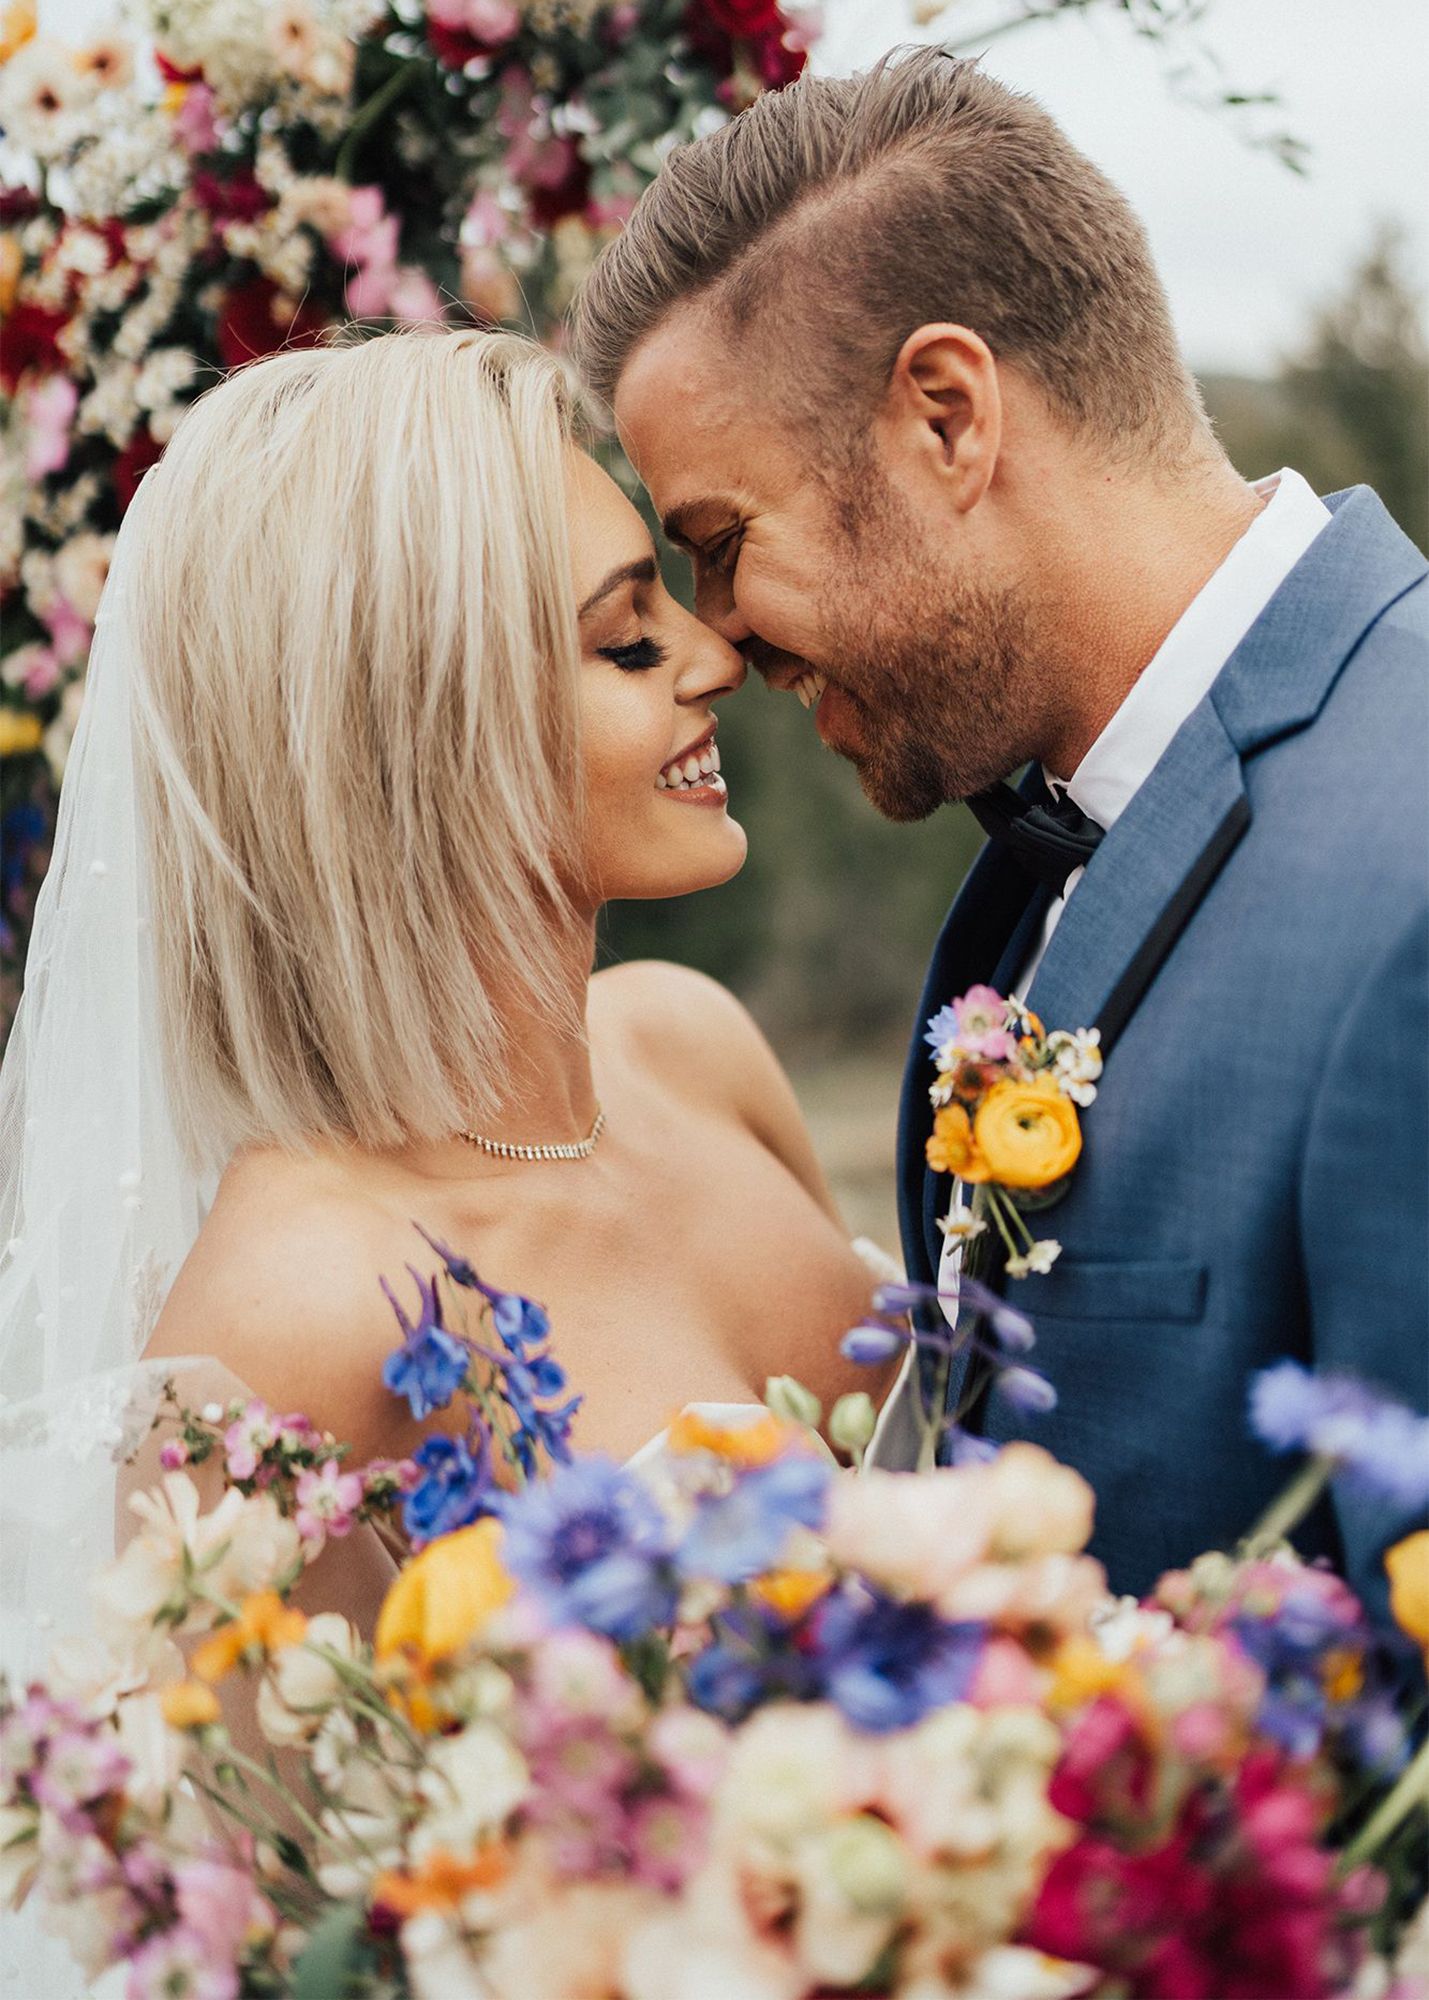 photo of a groom in a blue suit and blonde bride smiling and embracing during wedding ceremony